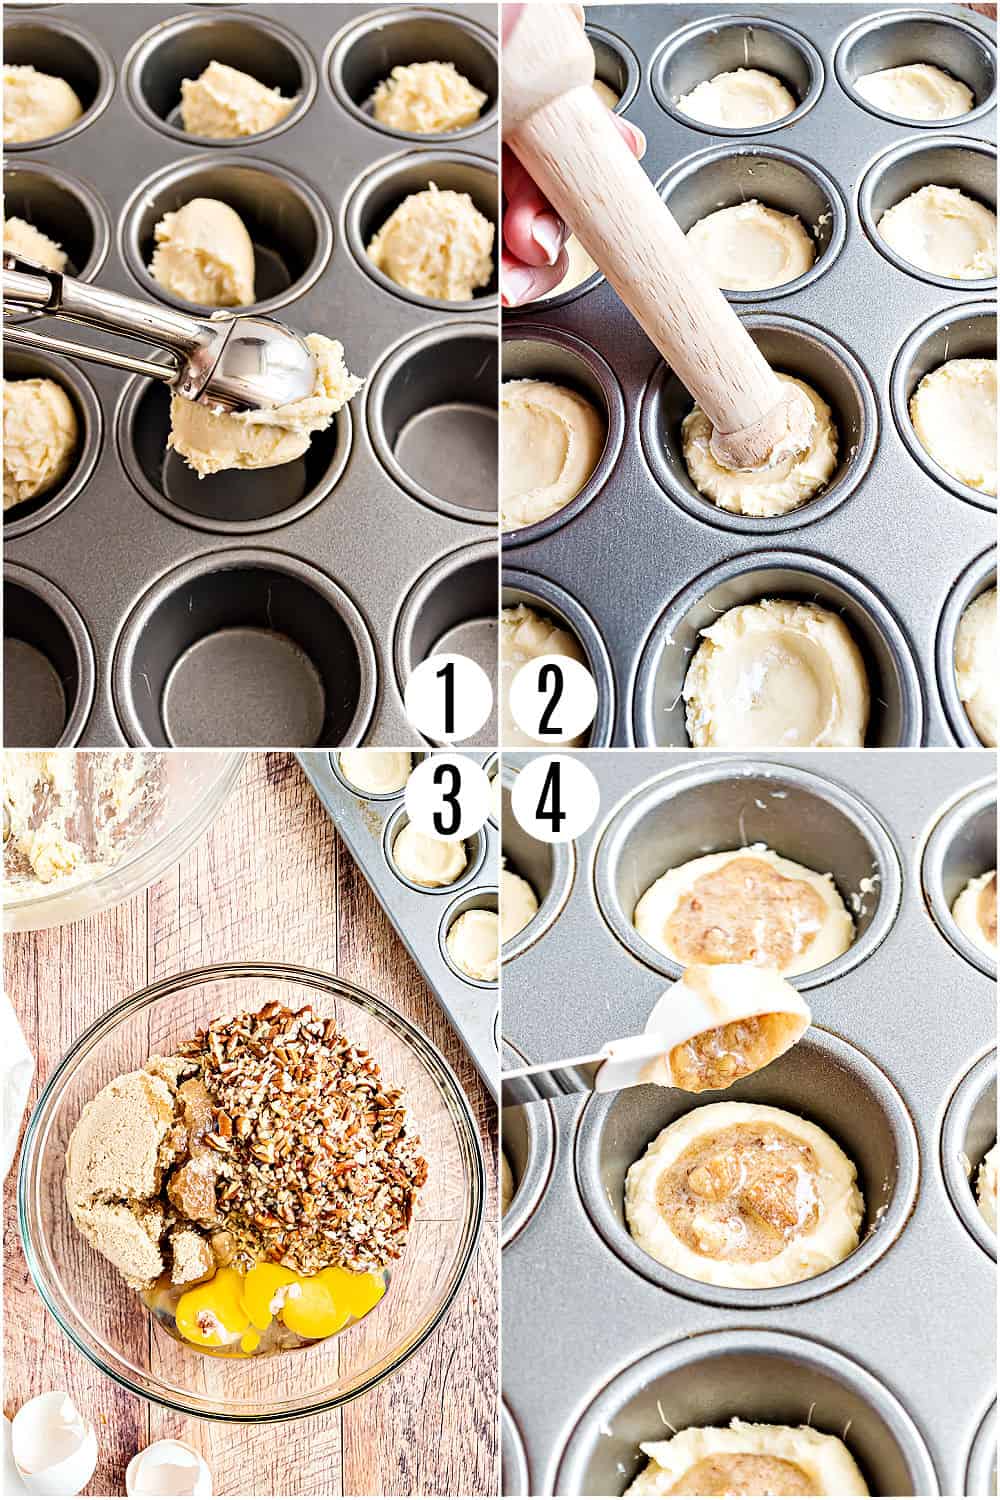 Step by step photos showing how to make pecan tassies.